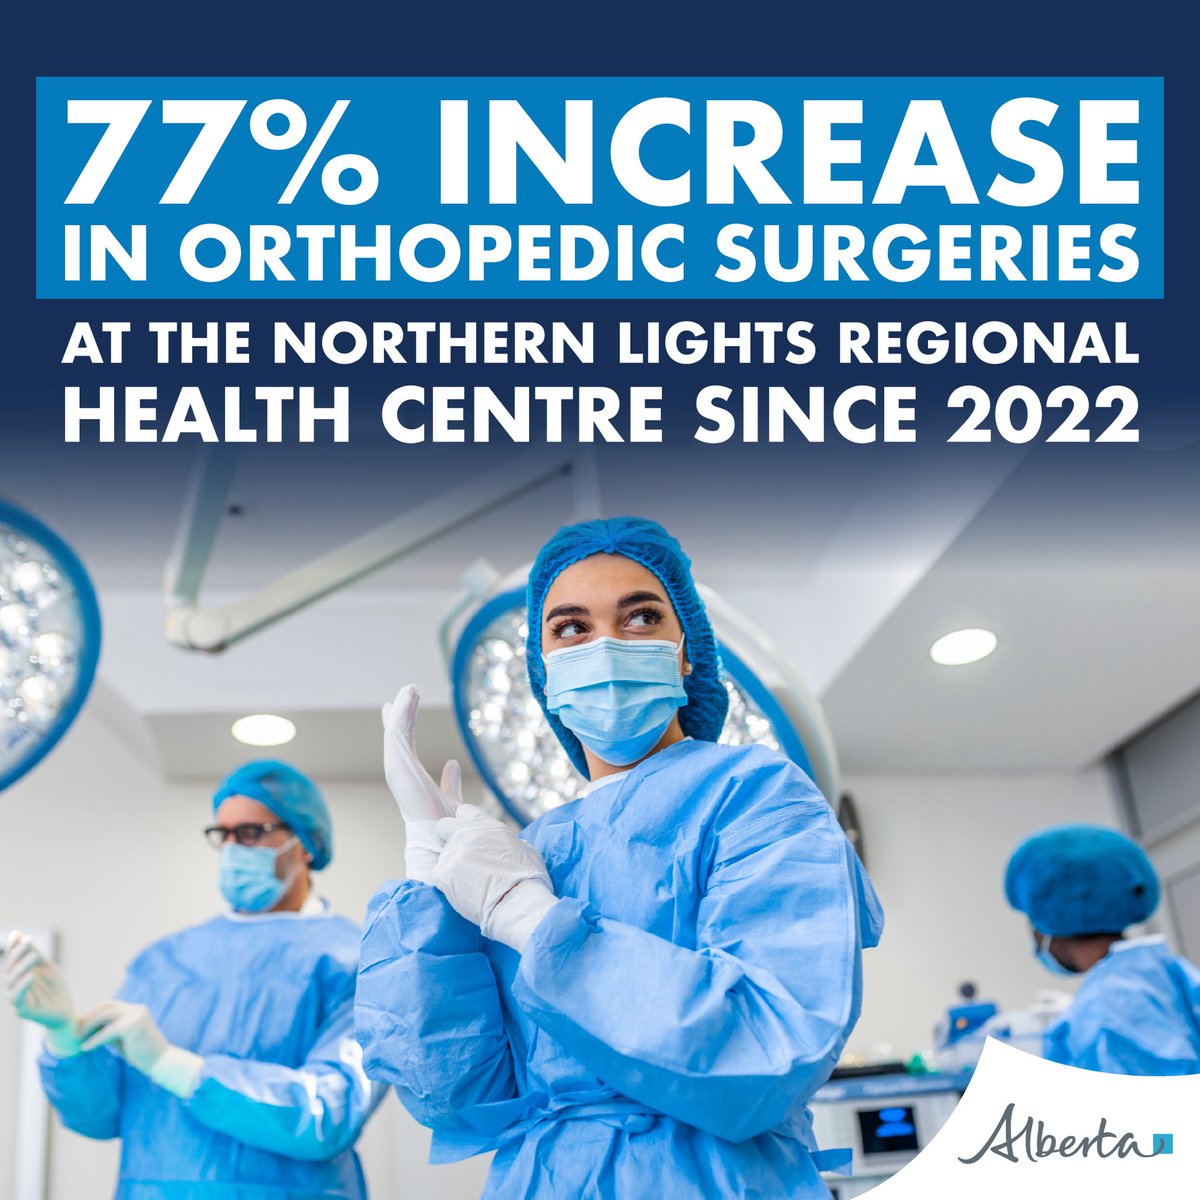 This is great news!! With the additional of two new orthopaedic surgeons in Fort McMurray’s Northern Lights Regional Health Centre, there has been an increase of 77% more surgeries done. More surgeons = more surgeries and the Government of Alberta is committed to increasing…